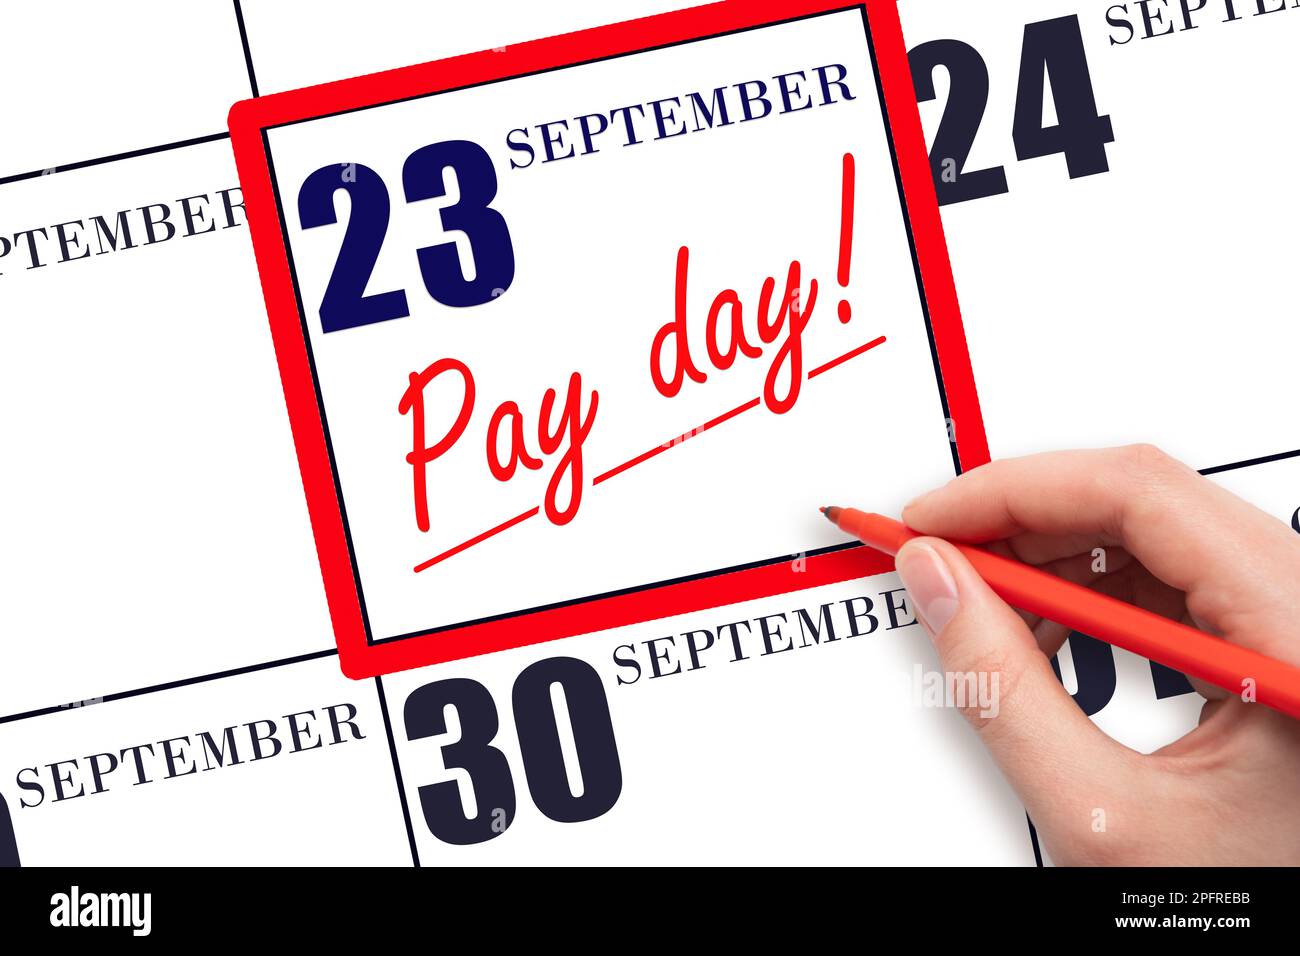 23rd day of September. Hand writing text PAY DATE on calendar date September  23 and underline it. Payment due date.  Reminder concept of payment. Aut Stock Photo